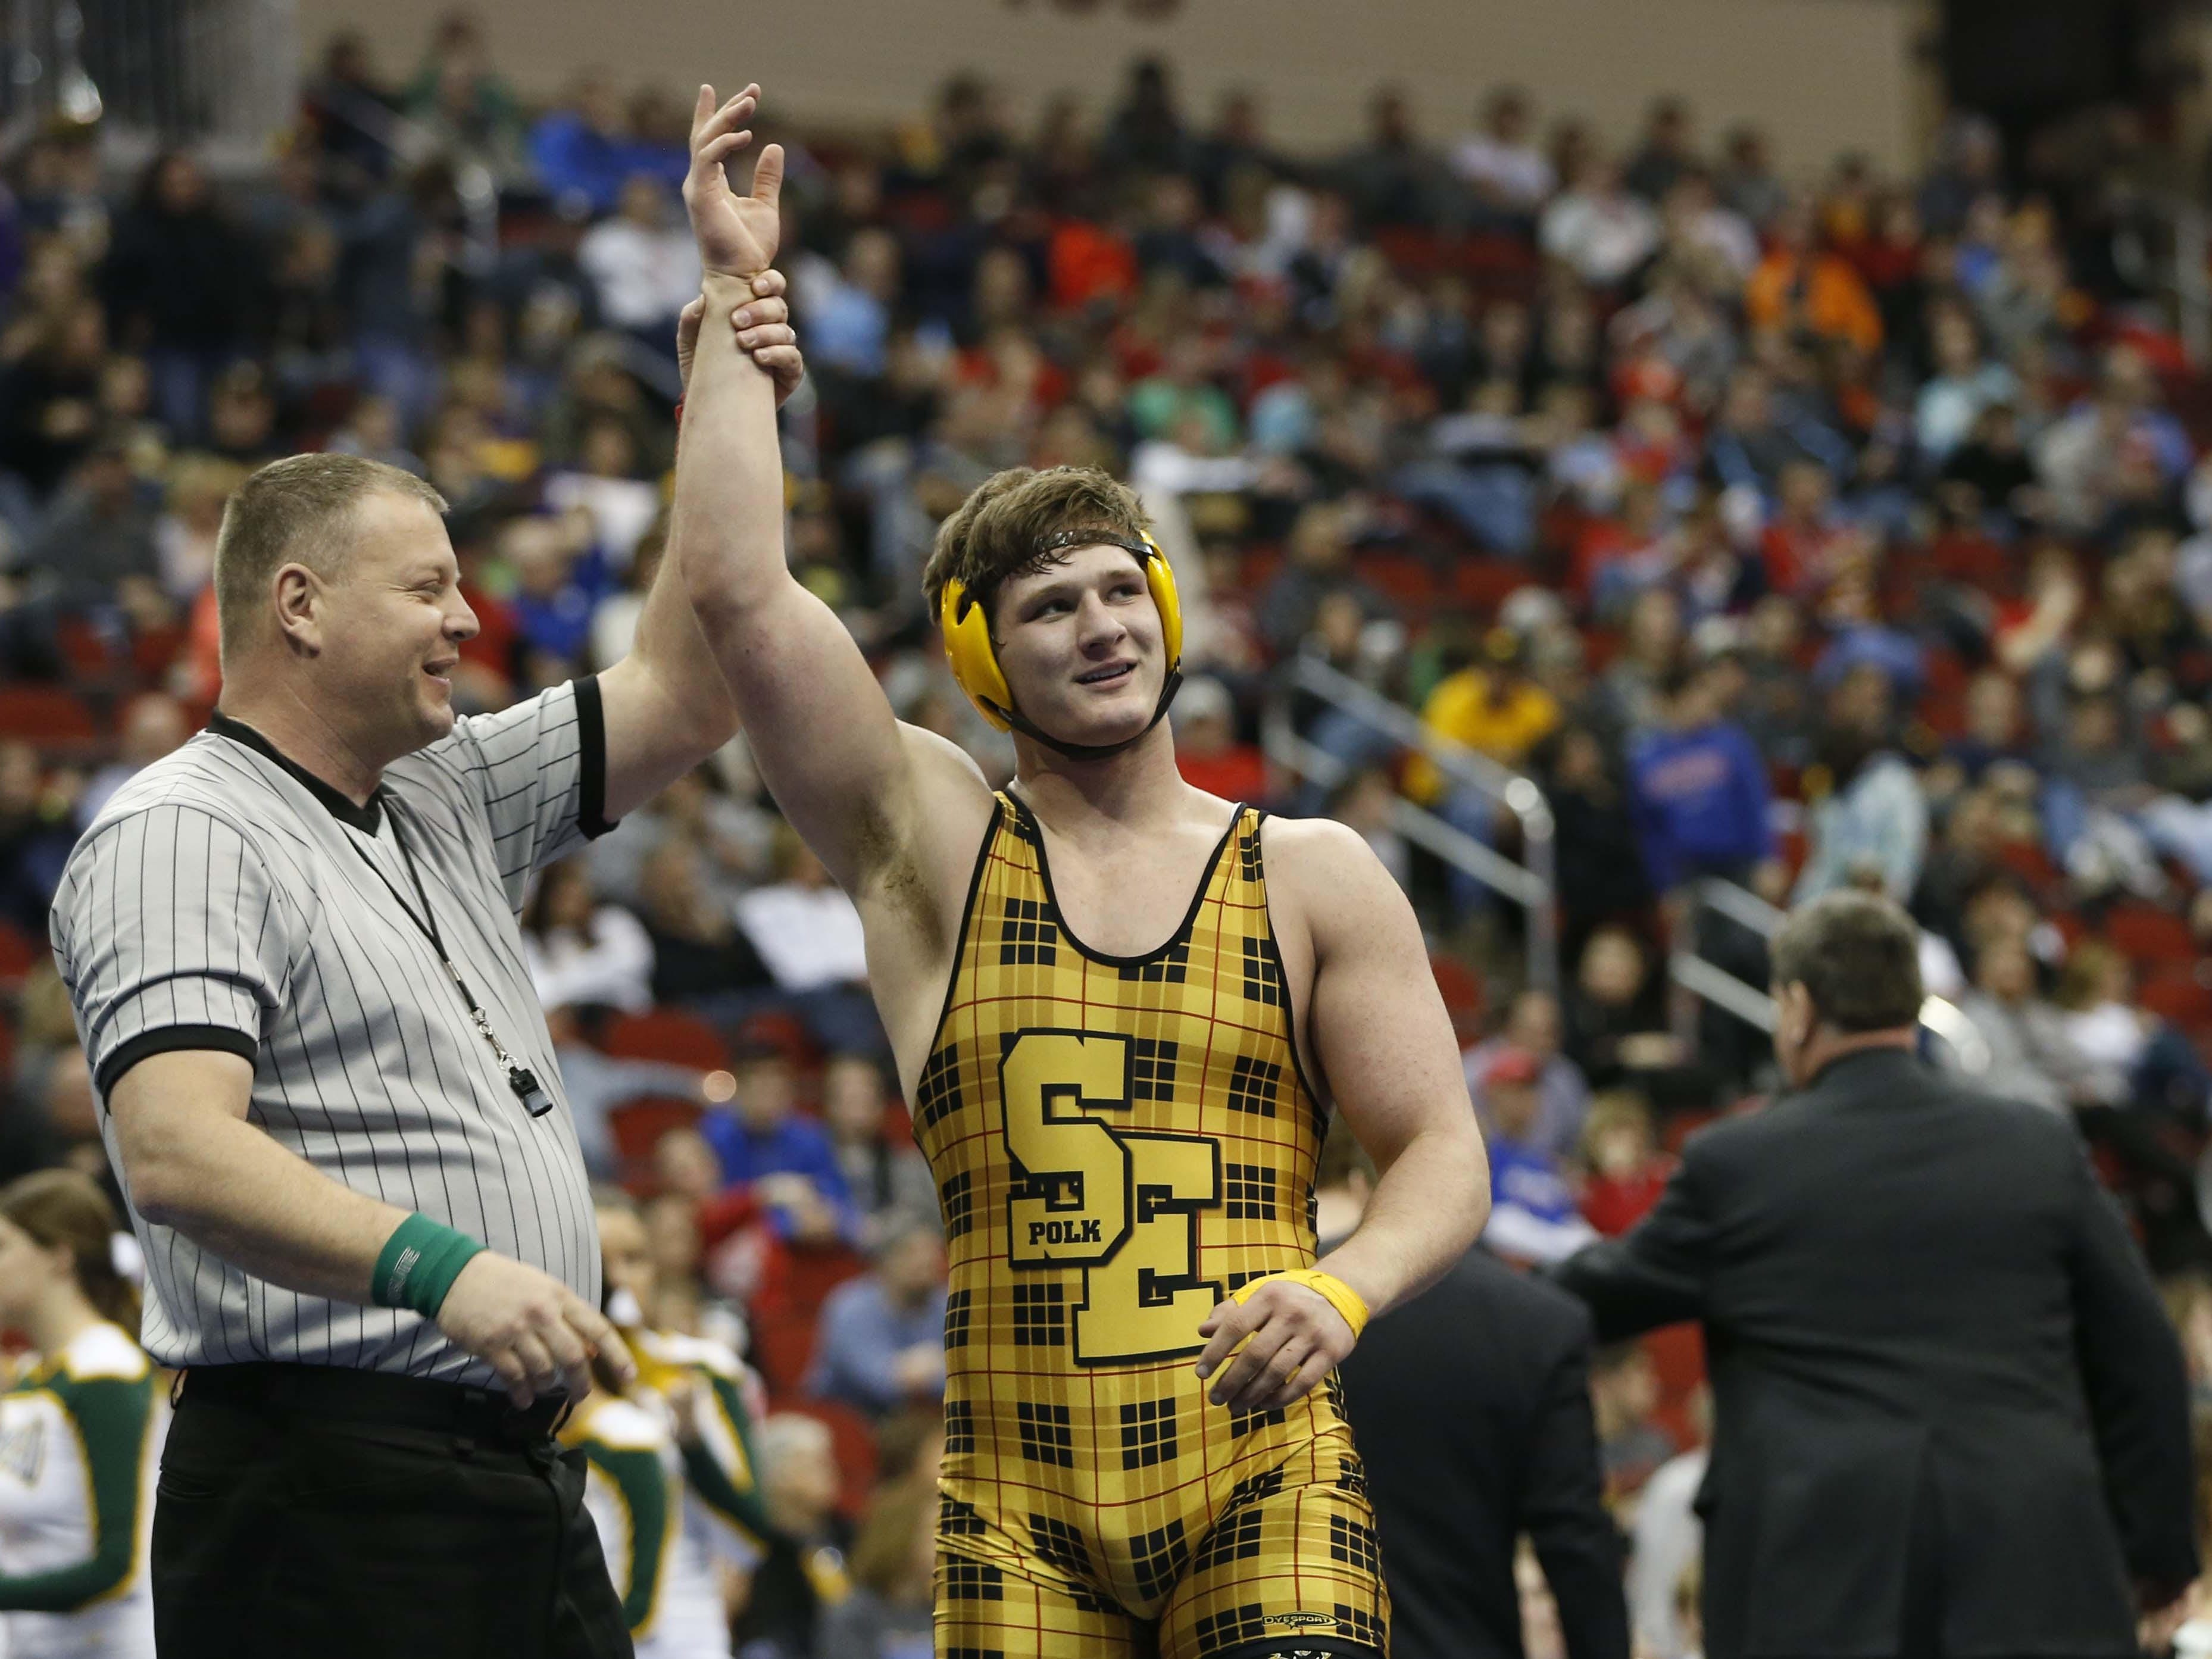 Southeast Polk's Ethan Andersen celebrates his win in the finals of the 3A-220 match Saturday, Feb. 21, 2015, at the State Wresting Tournament at Wells Fargo Arena in Des Moines.